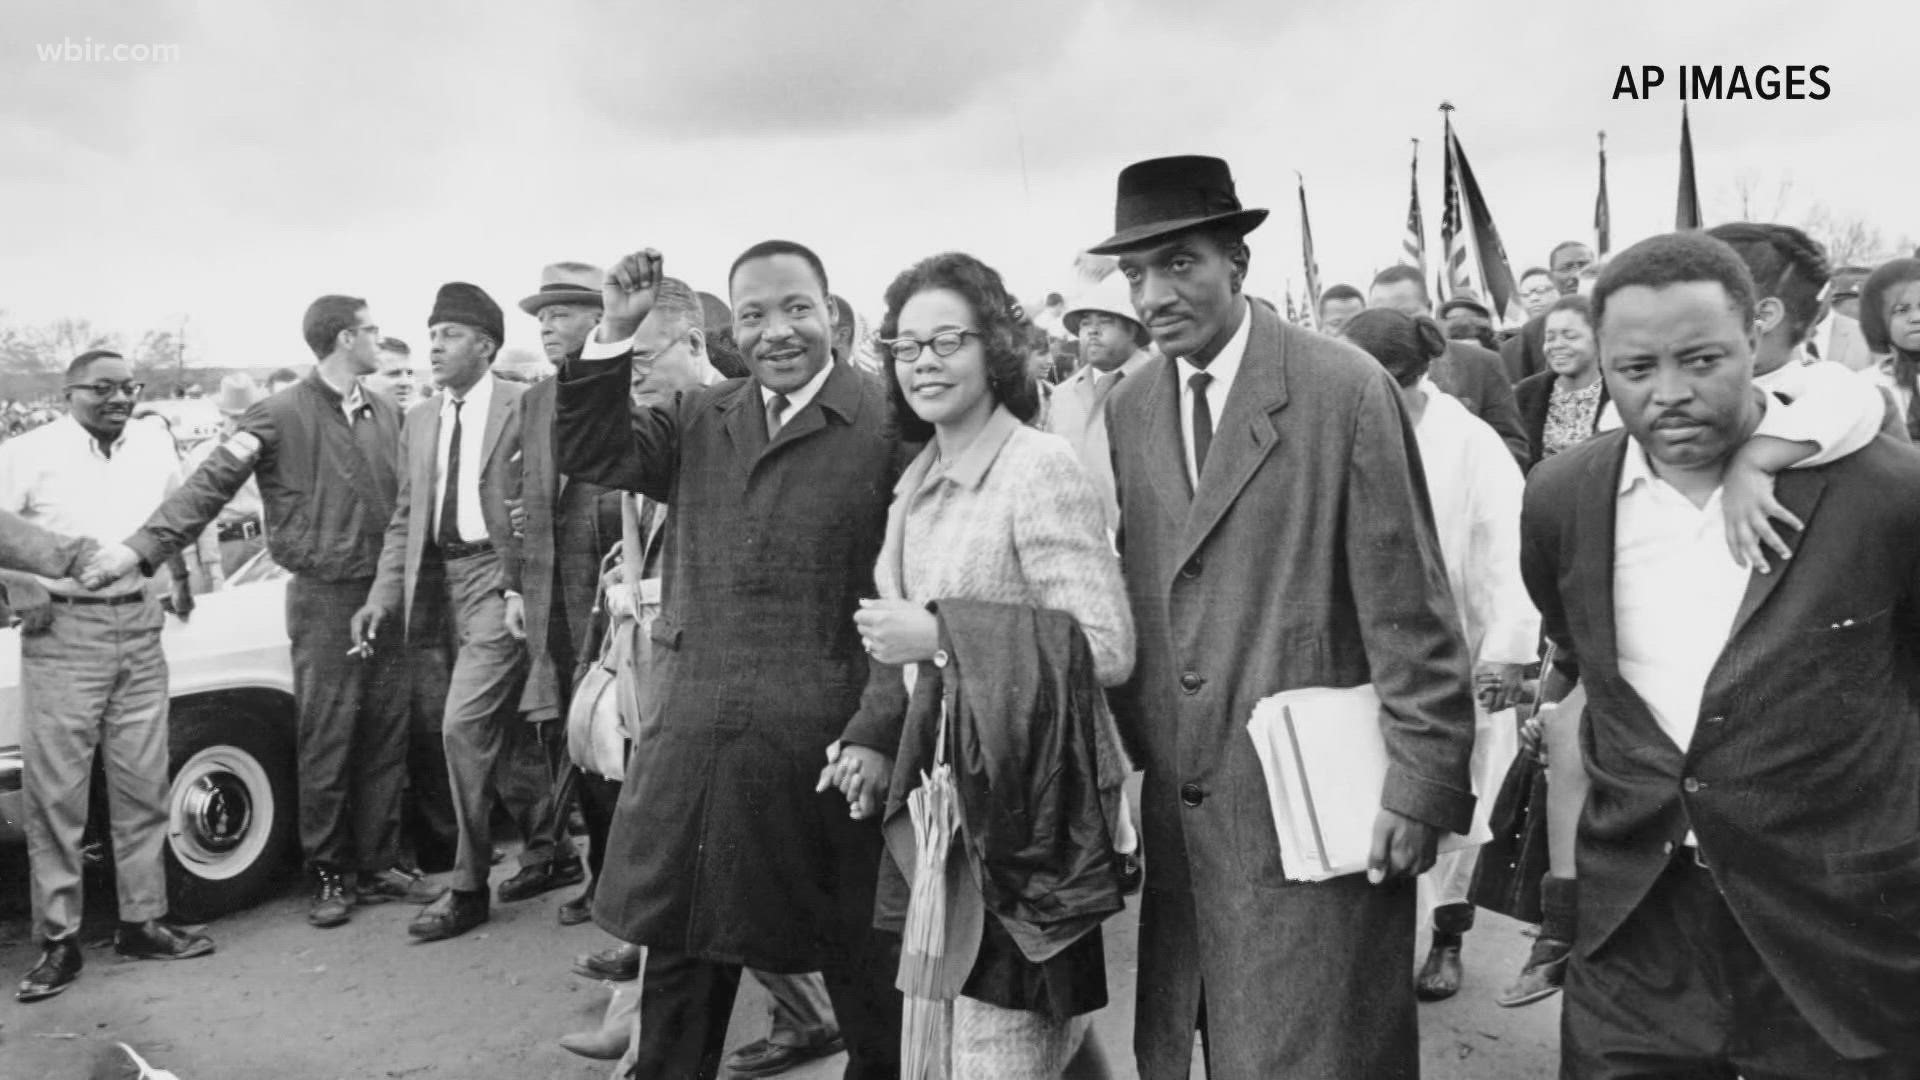 For a list of local activities hosted by the MLK Commemorative Commission in Knoxville visit mlkknoxville.com Jan. 11 2022-4pm